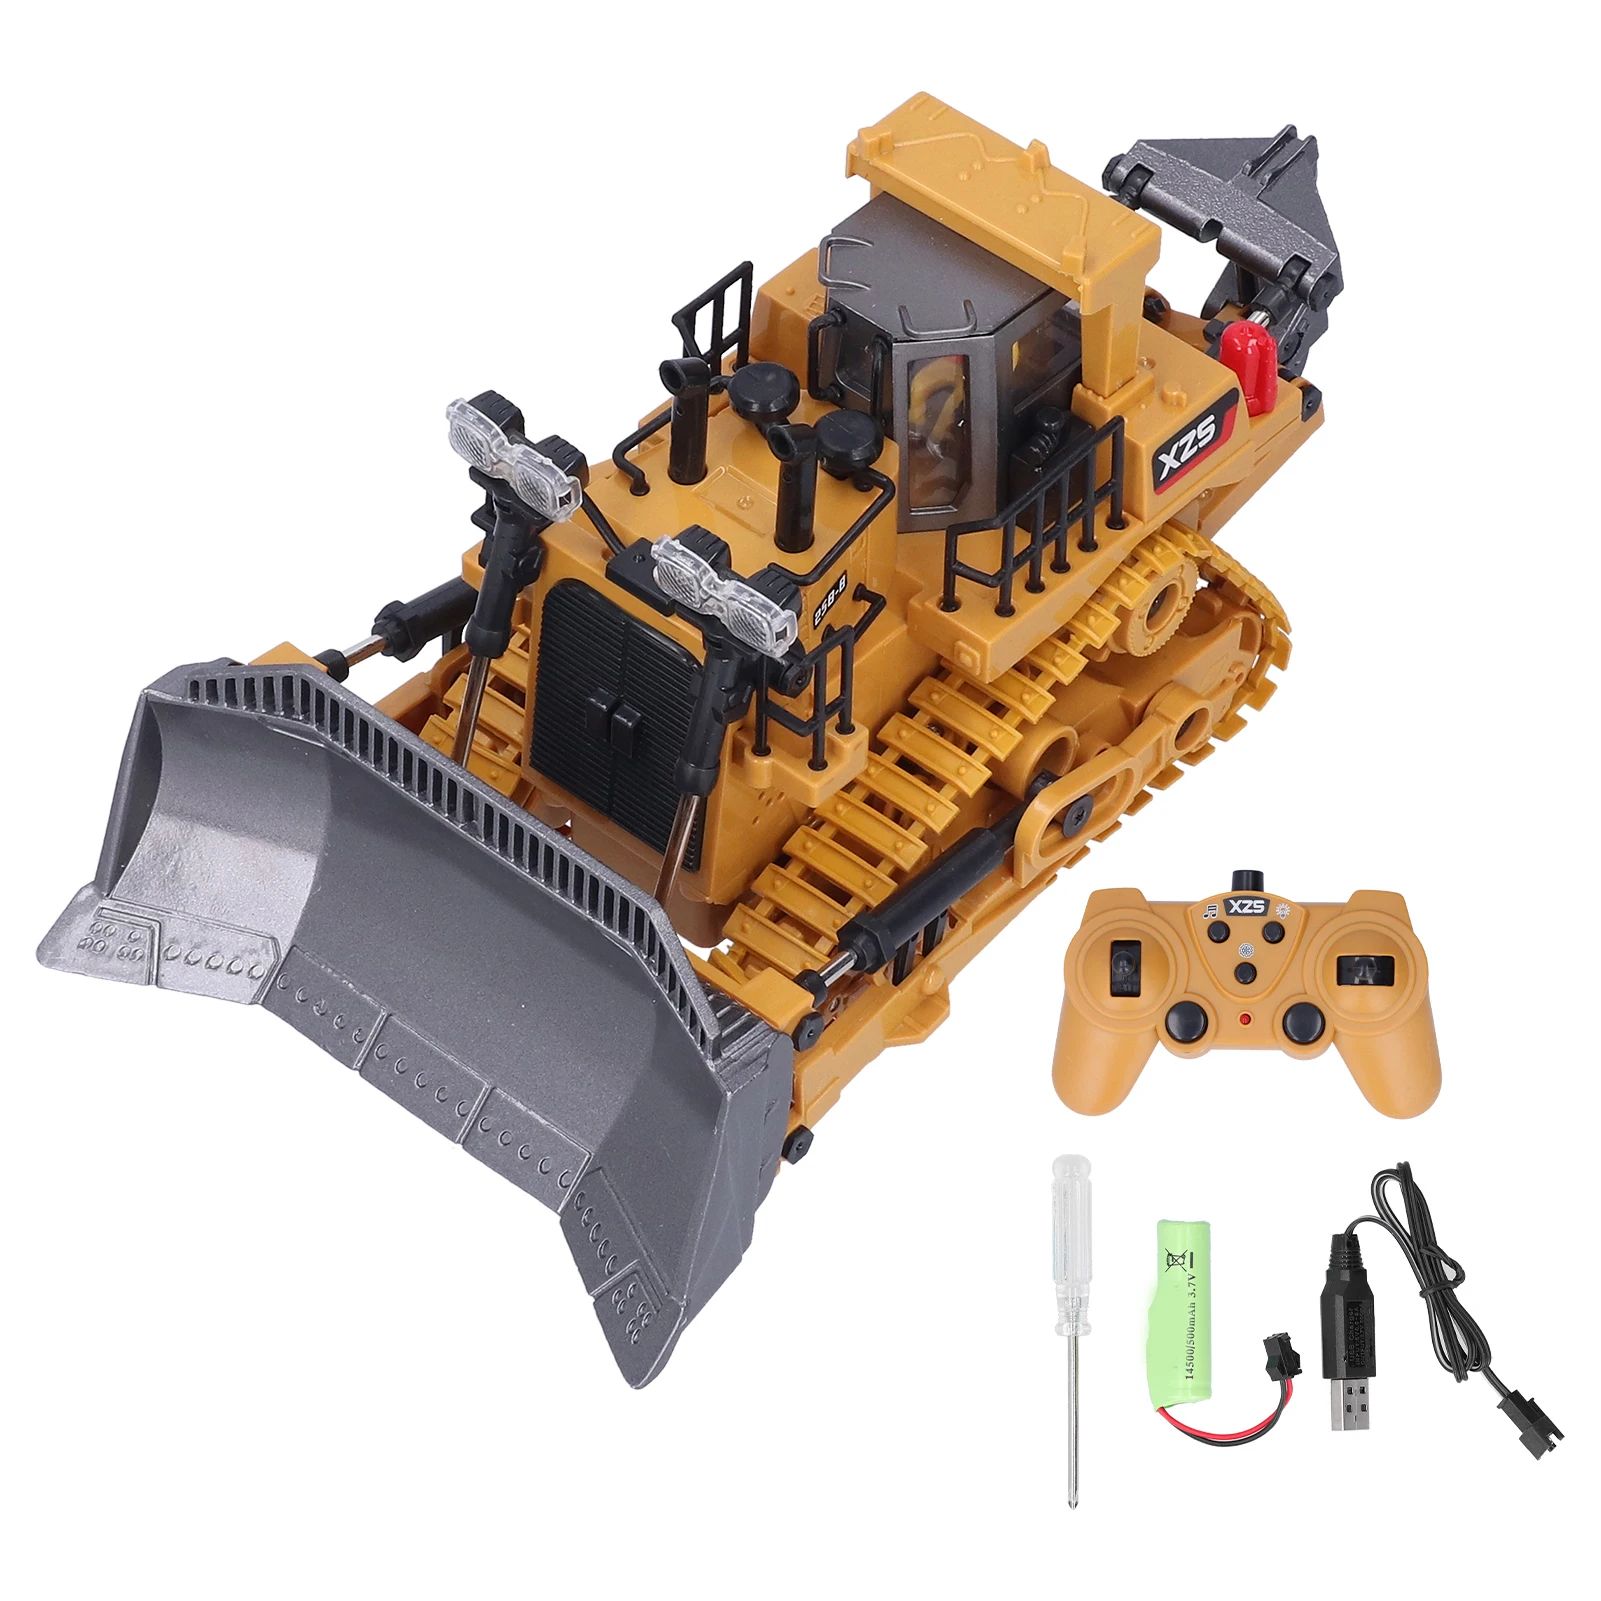 

1:24 Remote Control 9 Channels RC Construction Truck Toy Simulation Pushdozer Model Gift For Kids